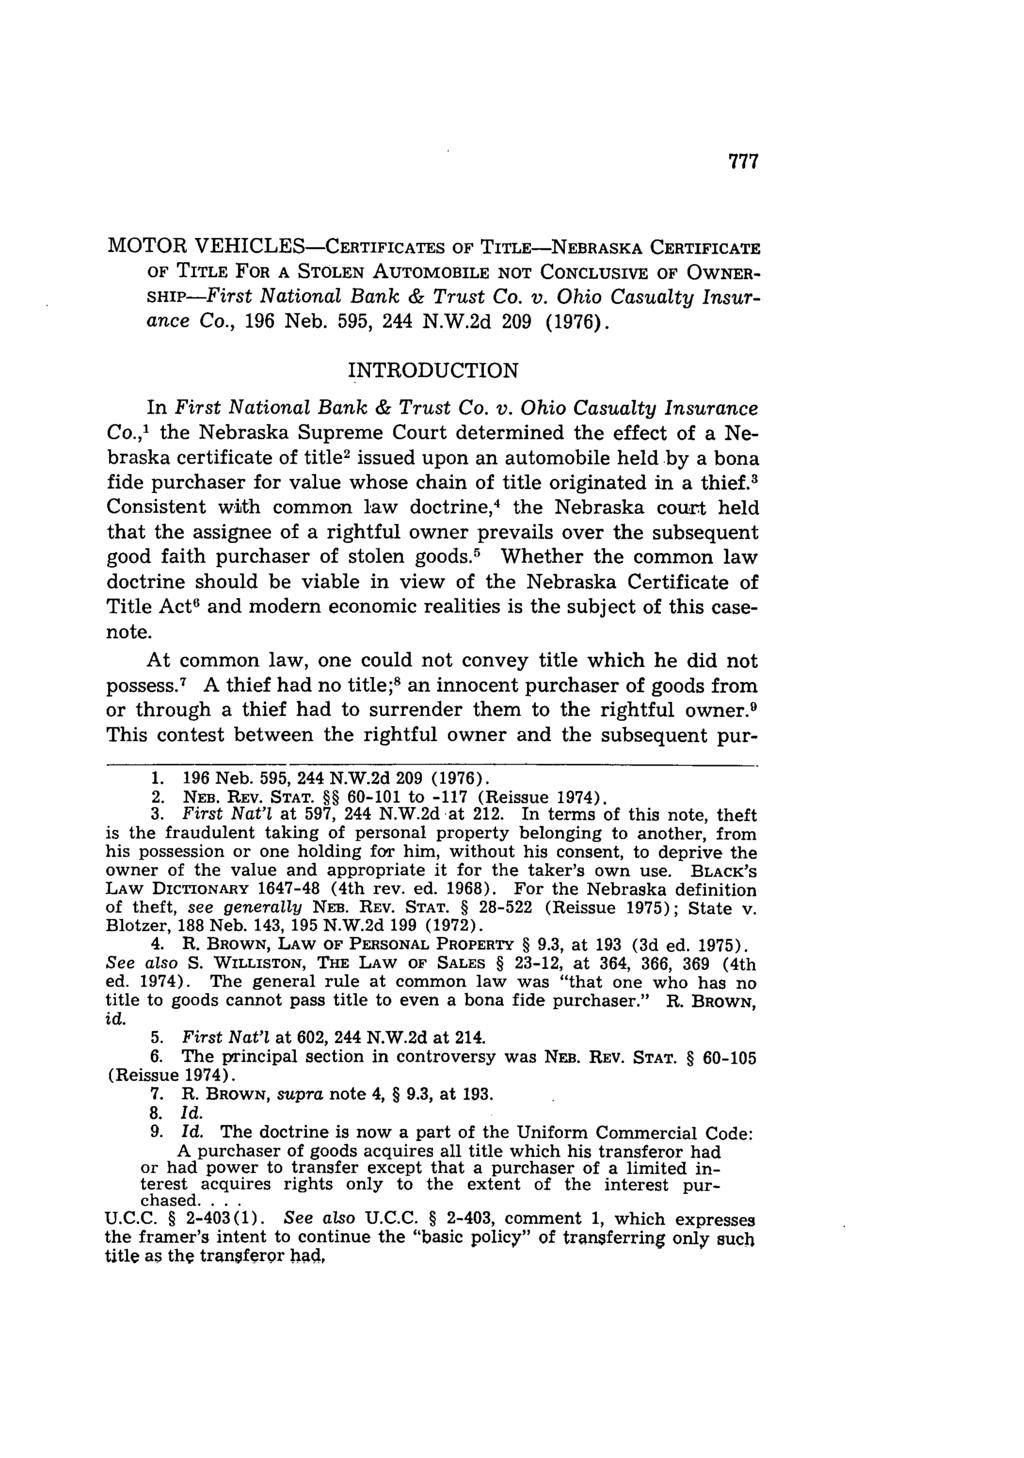 MOTOR VEHICLES-CERTIFICATES OF TITLE-NEBRASKA CERTIFICATE OF TITLE FOR A STOLEN AUTOMOBILE NOT CONCLUSIVE OF OWNER- SHIP-First National Bank & Trust Co. v. Ohio Casualty Insurance Co., 196 Neb.